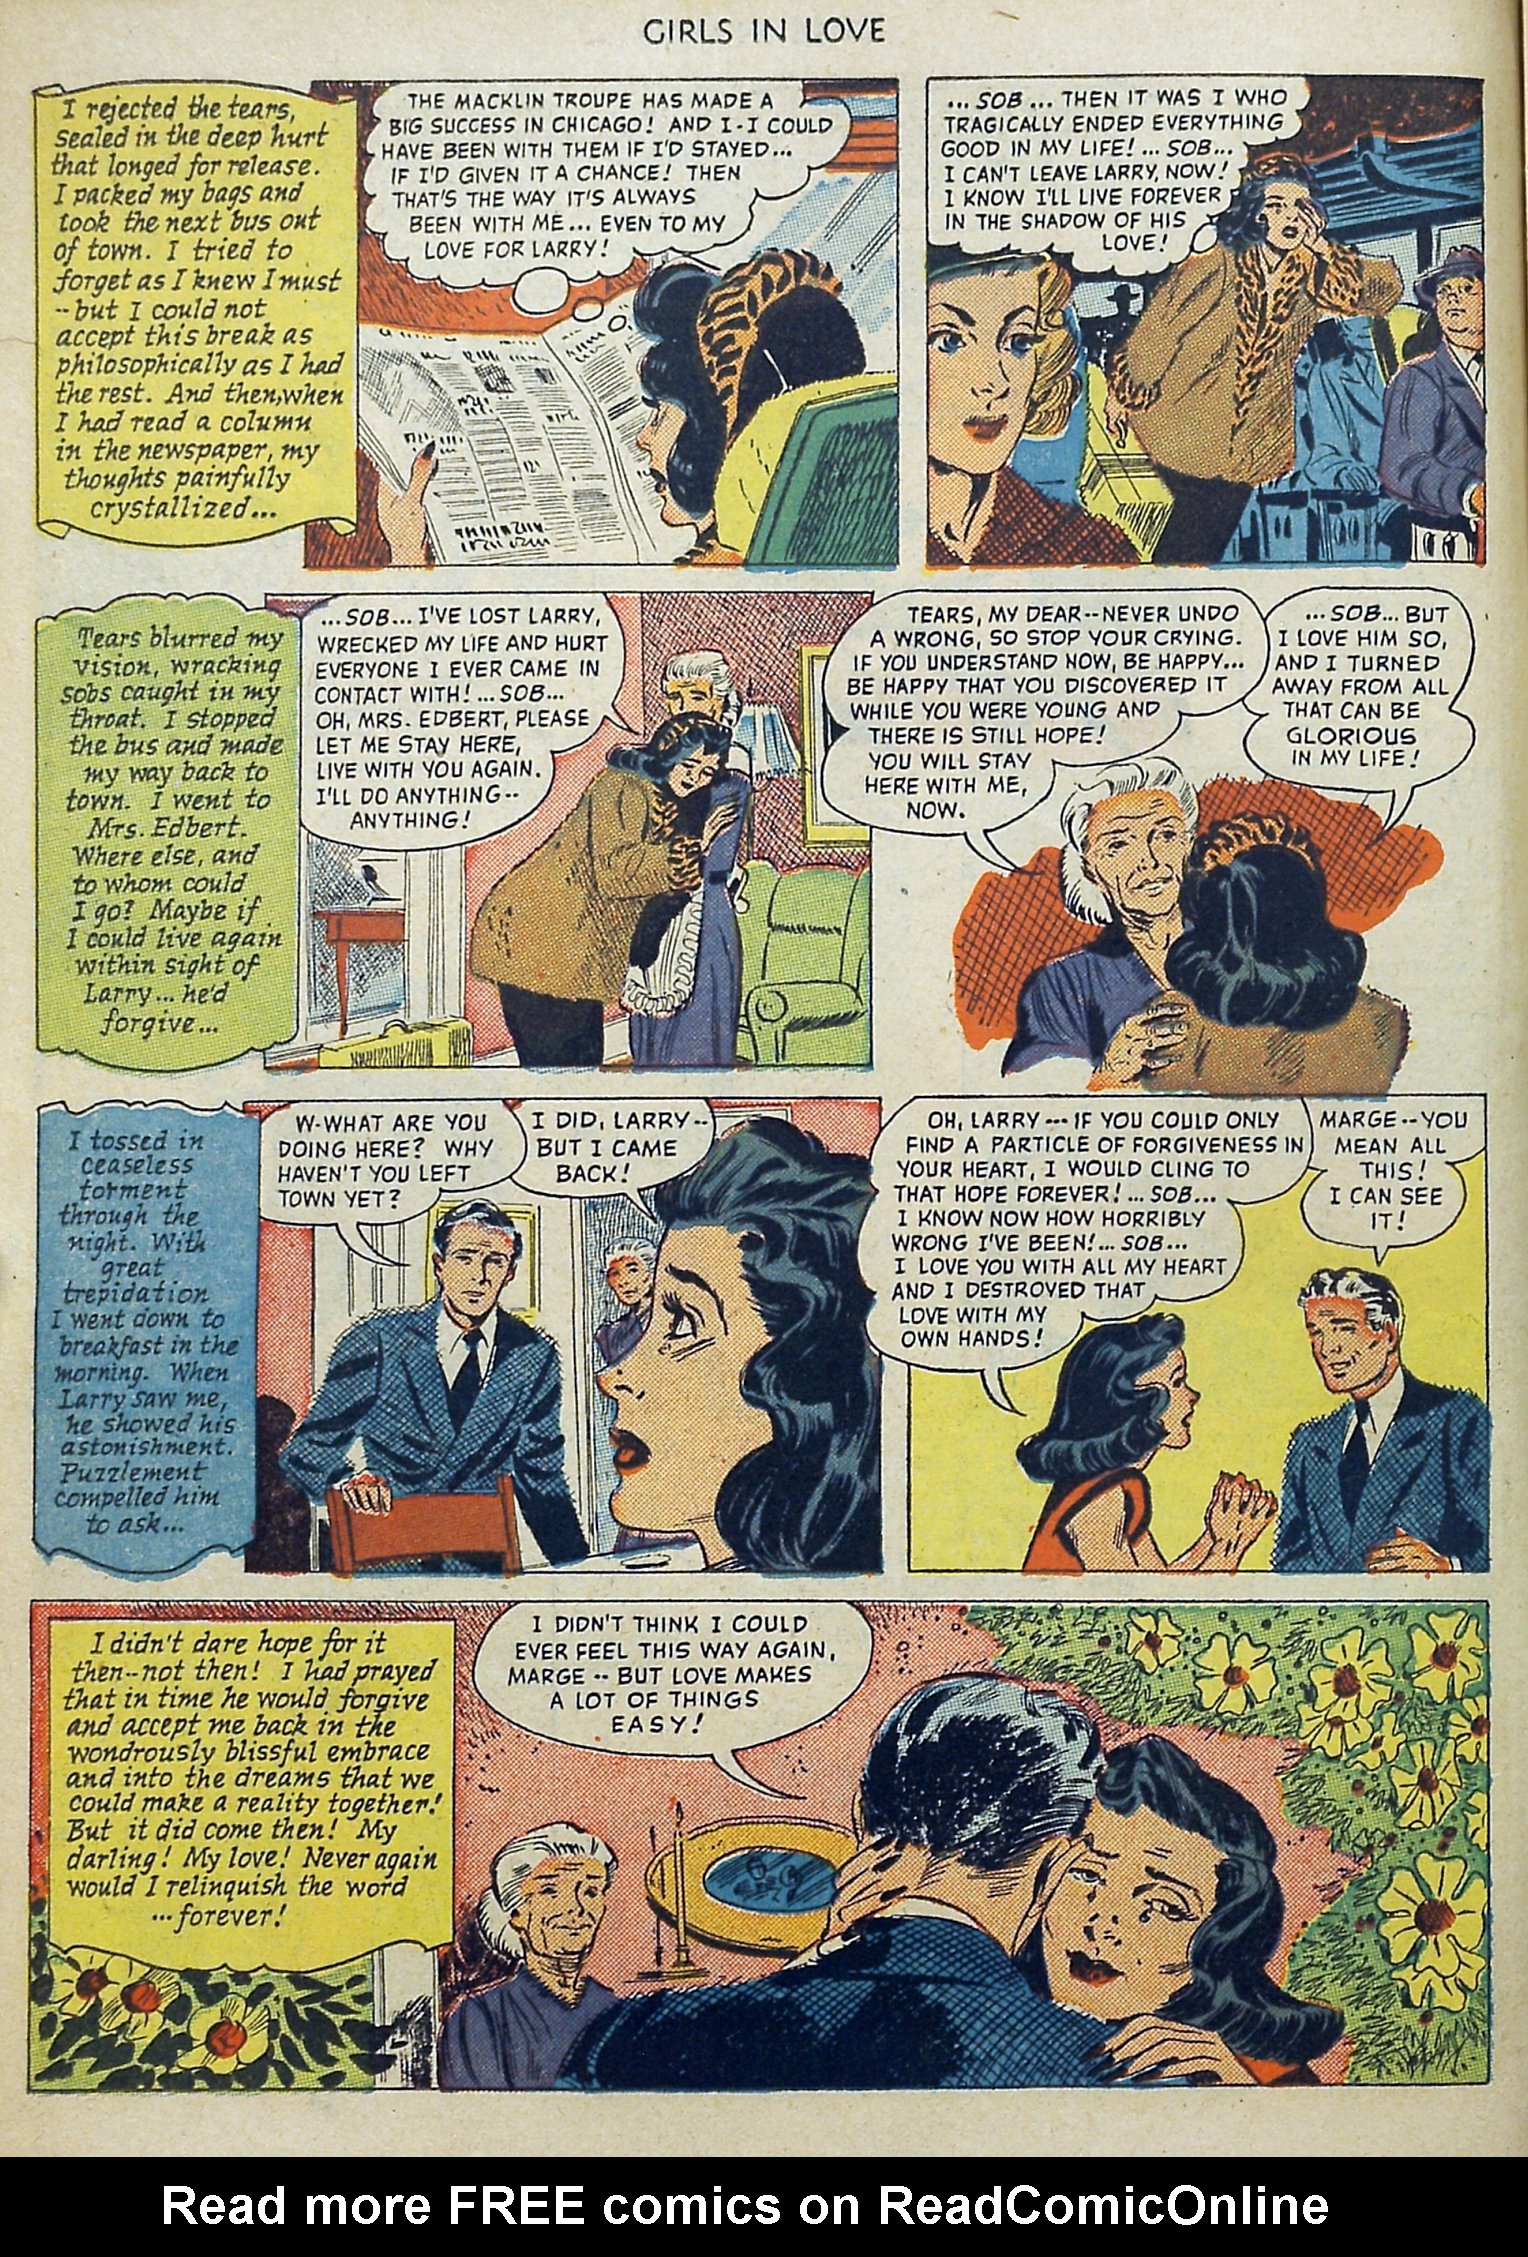 Read online Girls in Love (1950) comic -  Issue #1 - 14